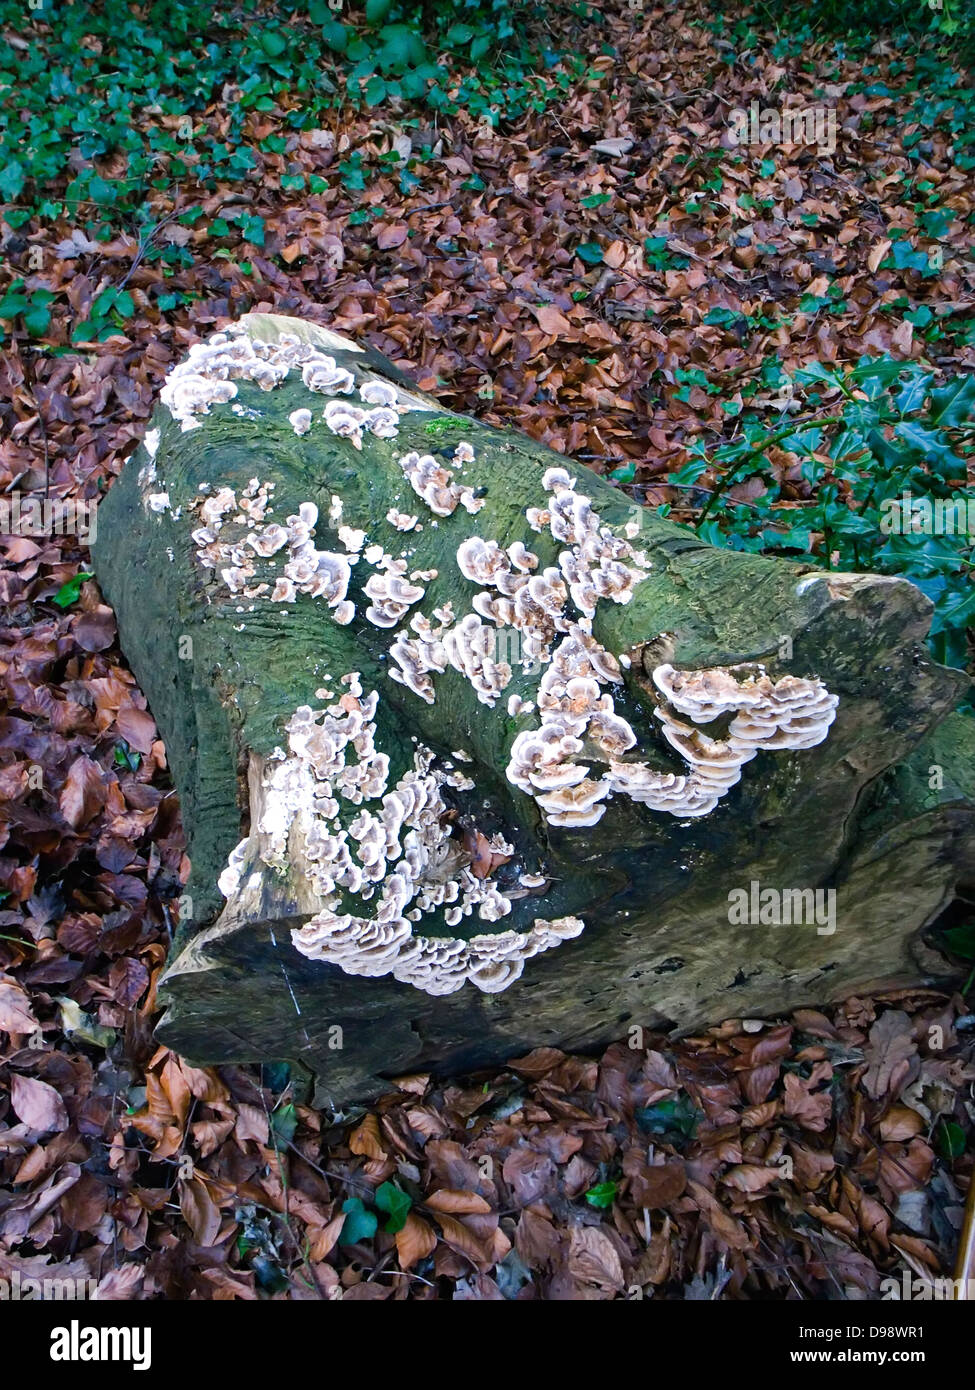 Fungus growth on a roptting log of timber in woodland Stock Photo